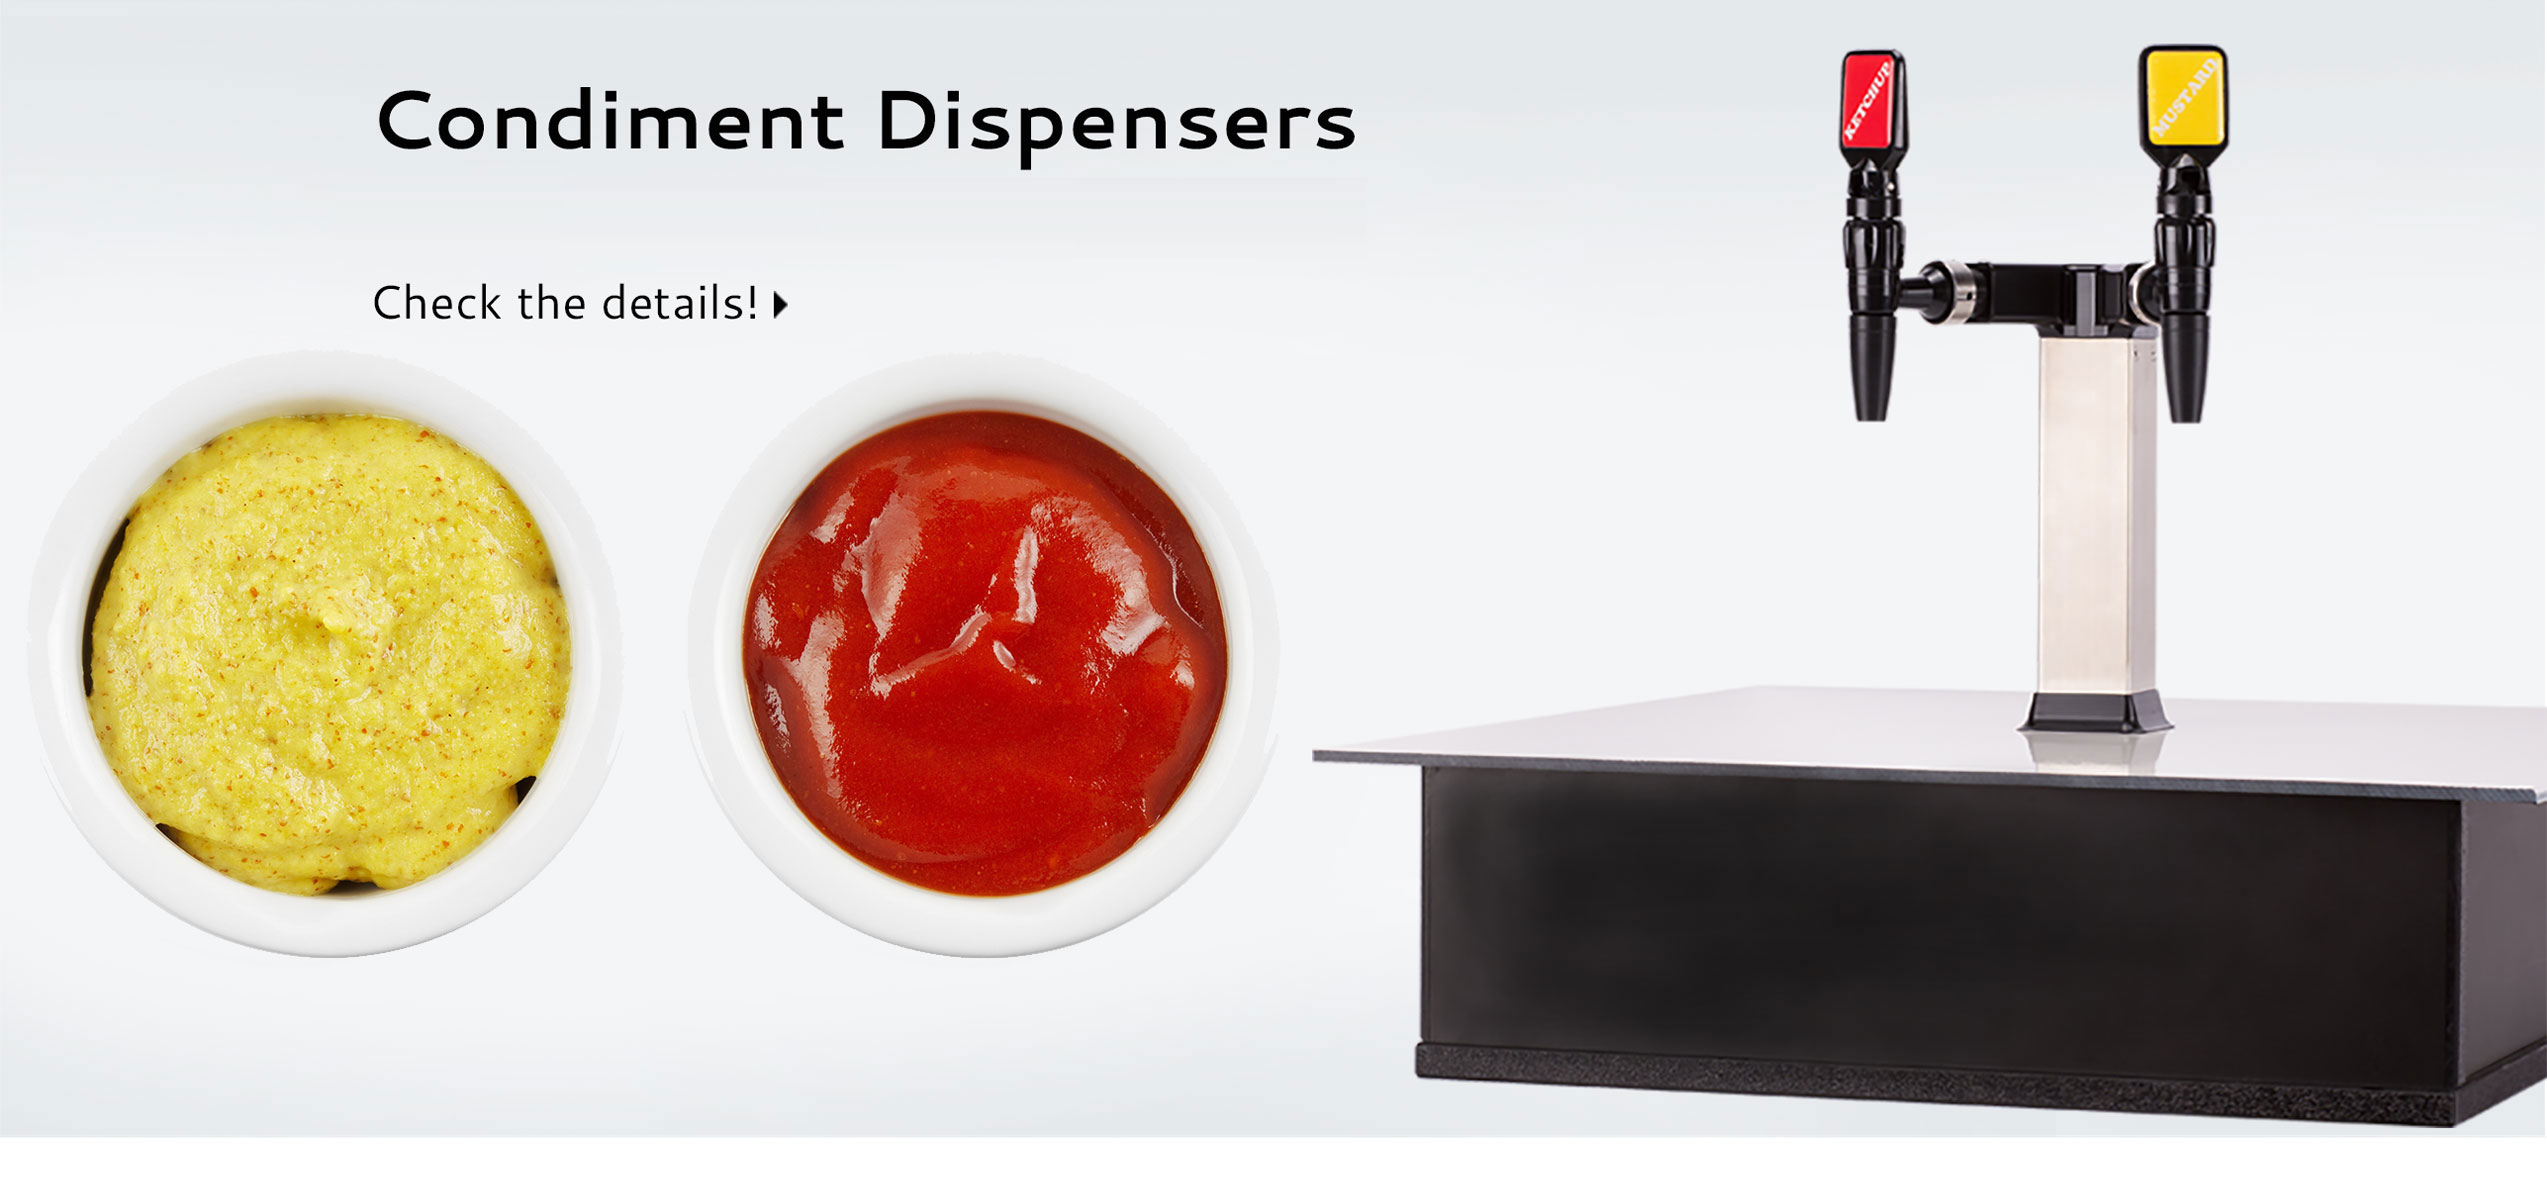 Condiment Dispensers
Portion control at your fingertips